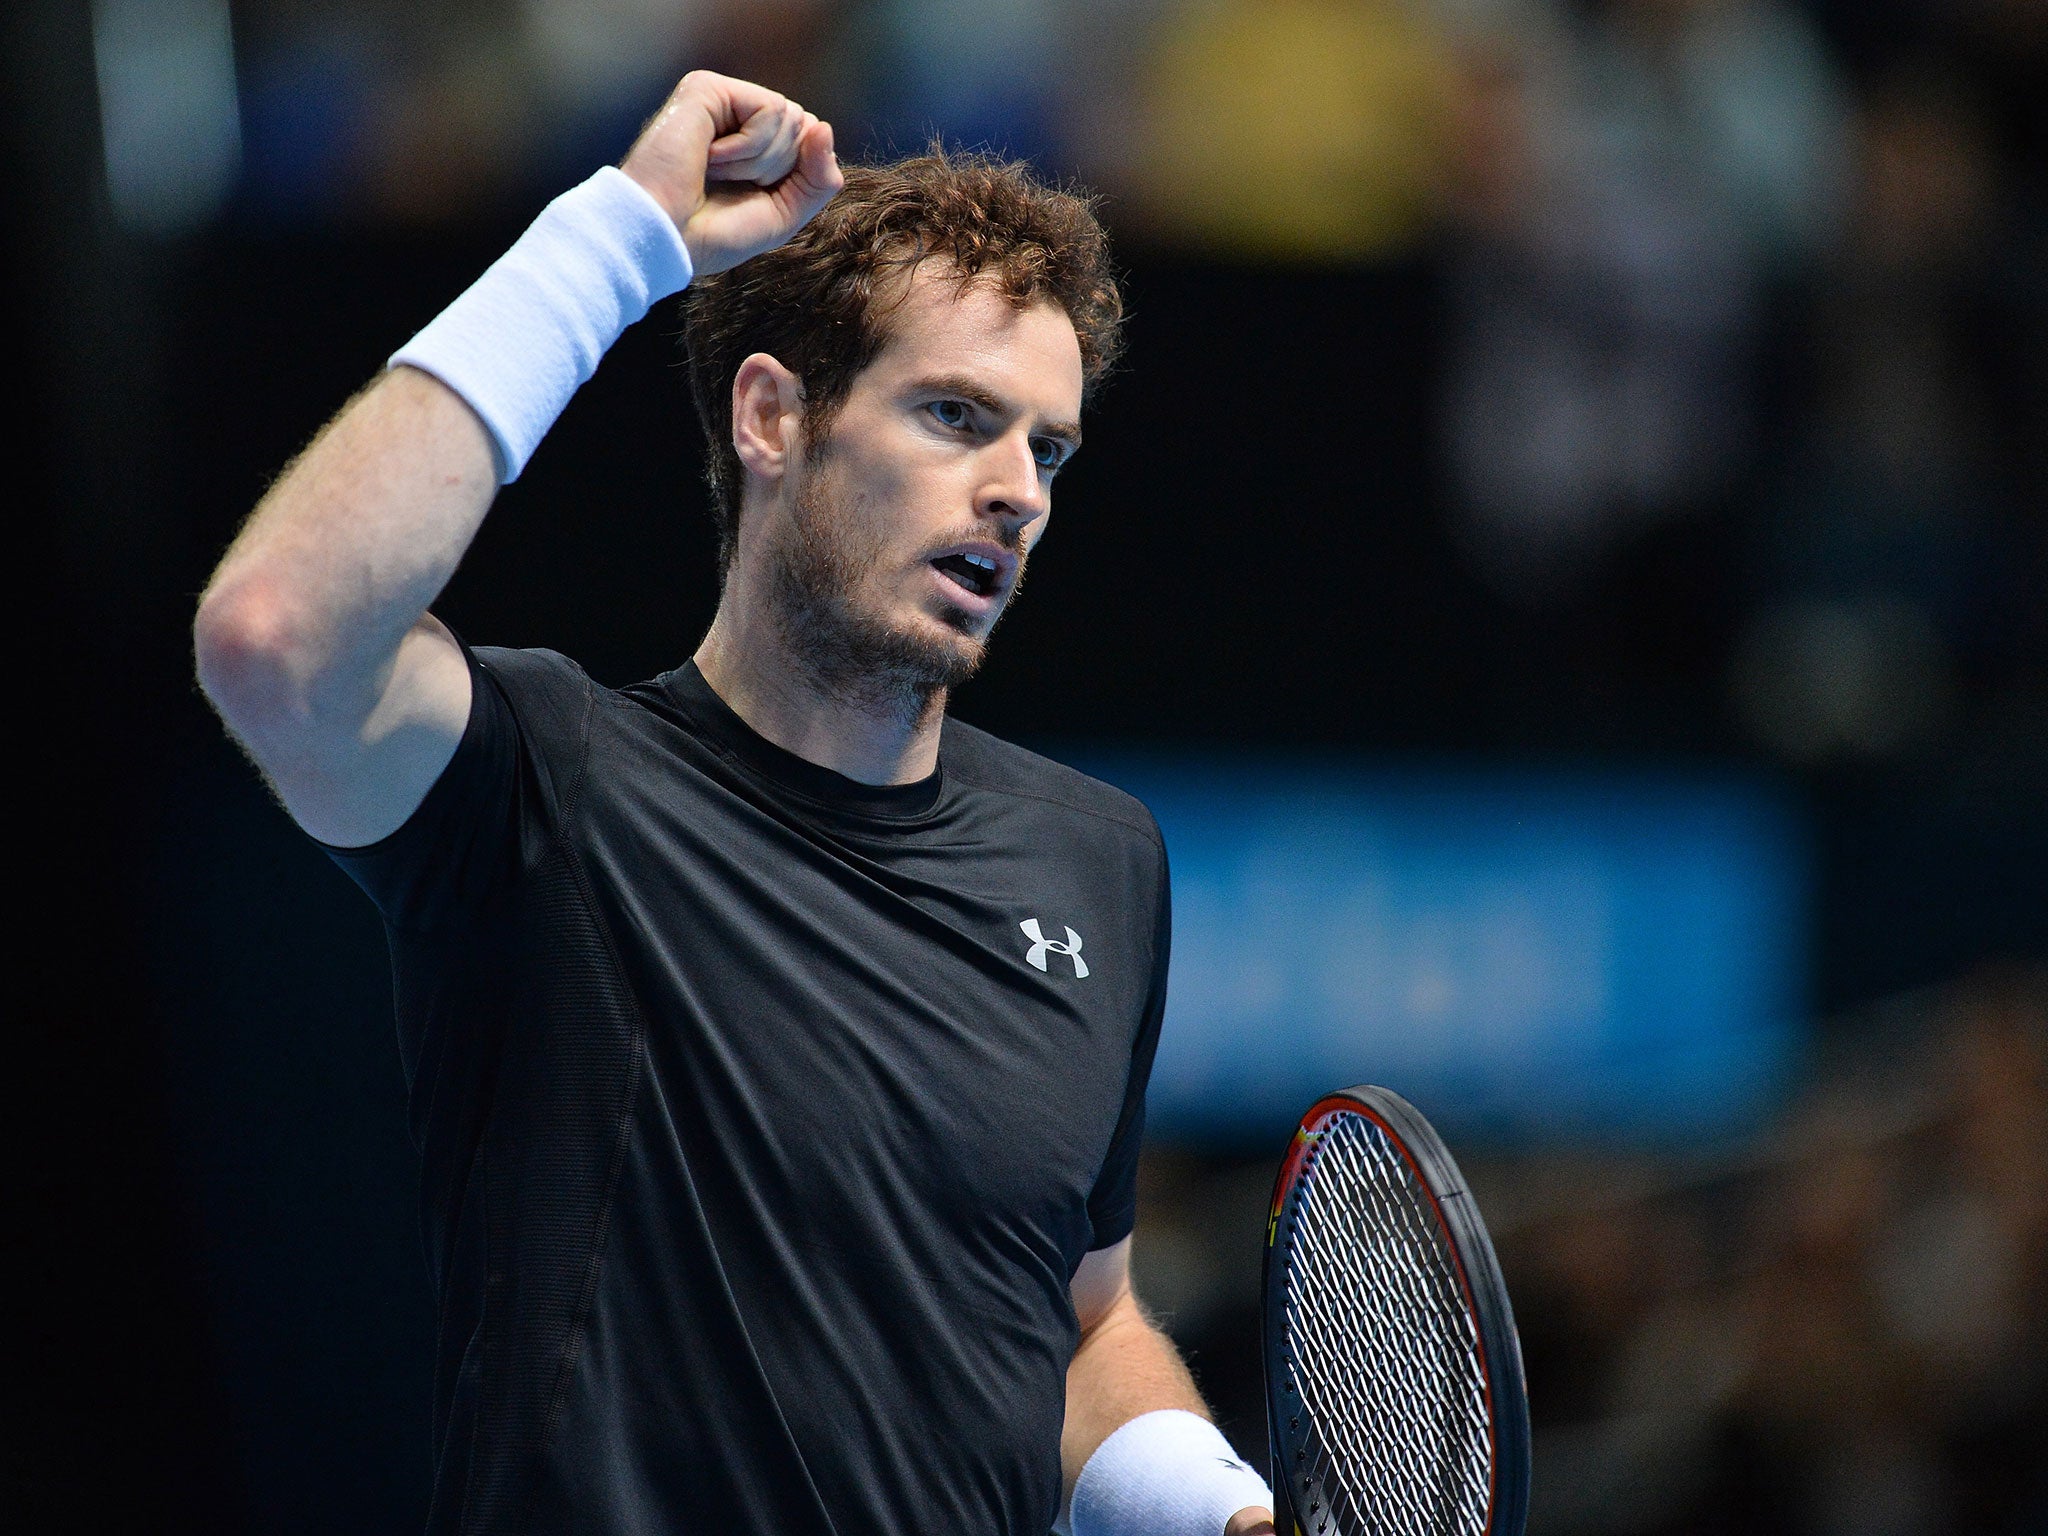 Andy Murray celebrates a 6-4, 6-4 victory over David Ferrer in the ATP World Tour Finals